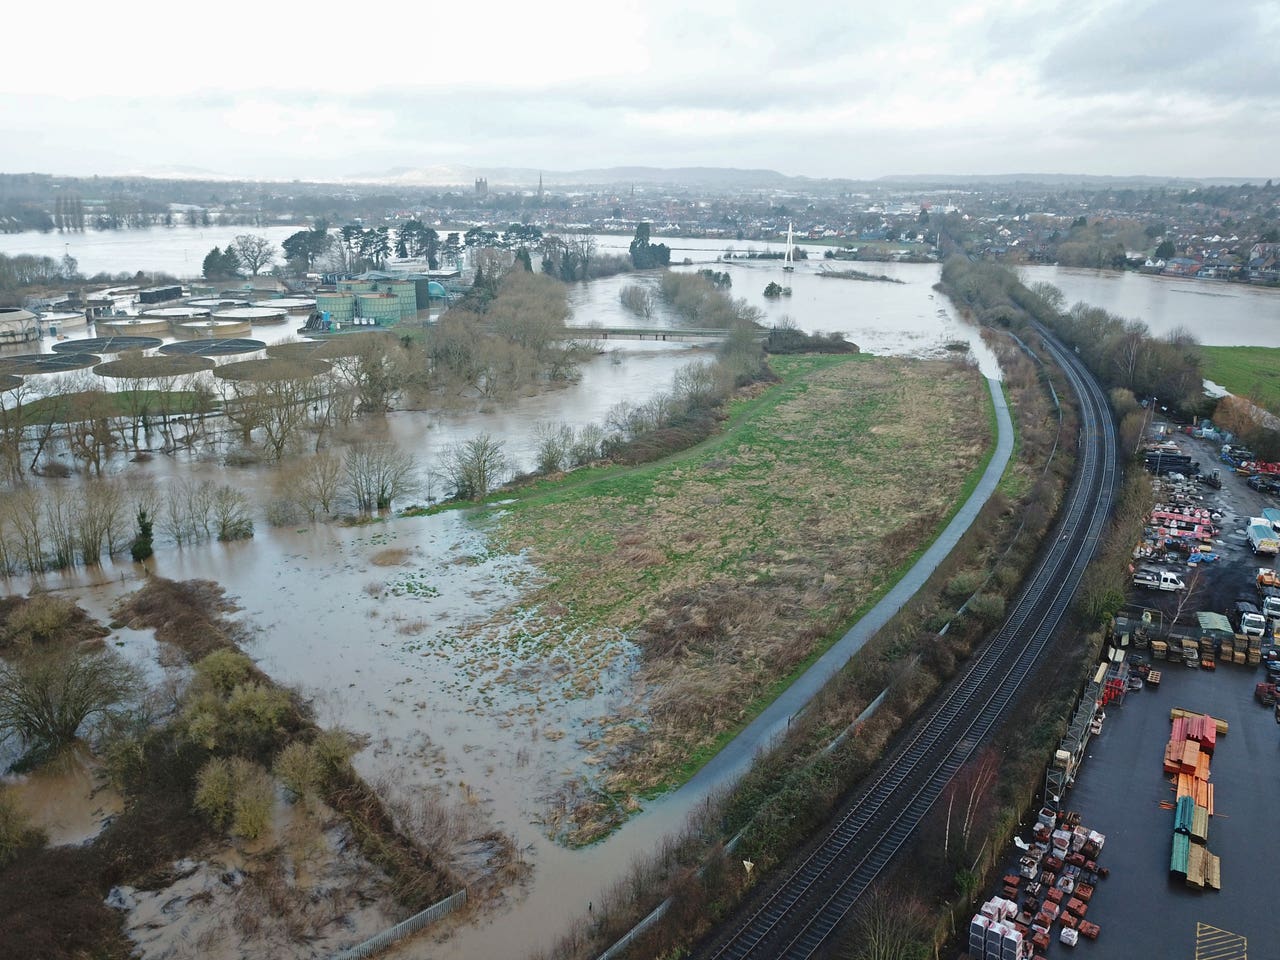 Hereford locals tell of ‘crazy’ floods as River Wye hits record levels